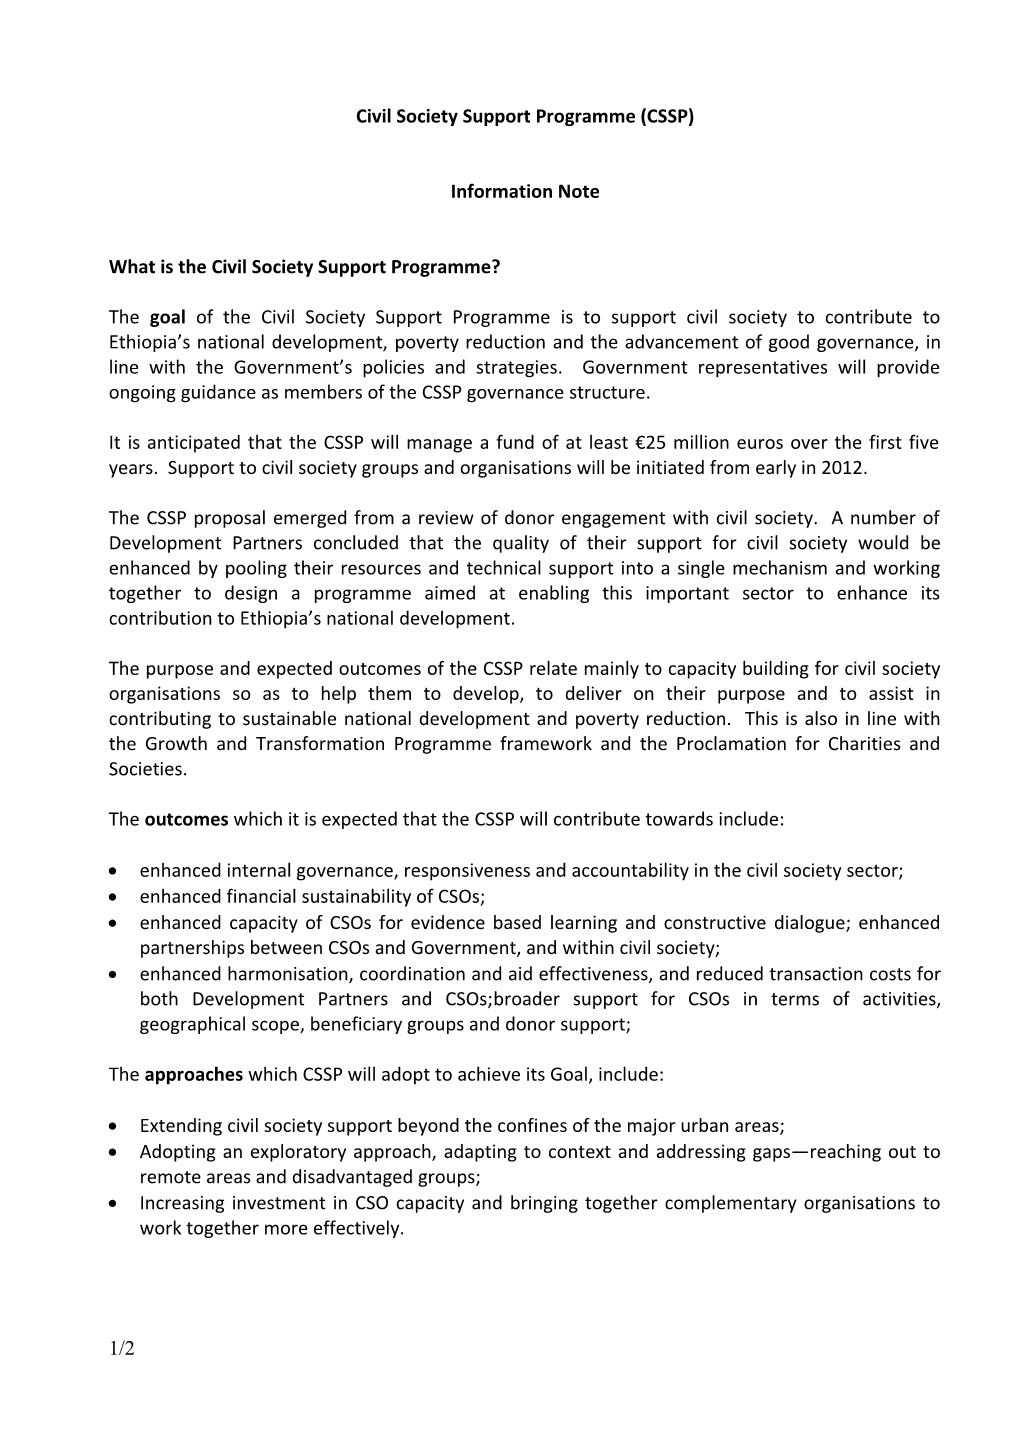 Civil Society Support Programme (CSSP) Briefing Note